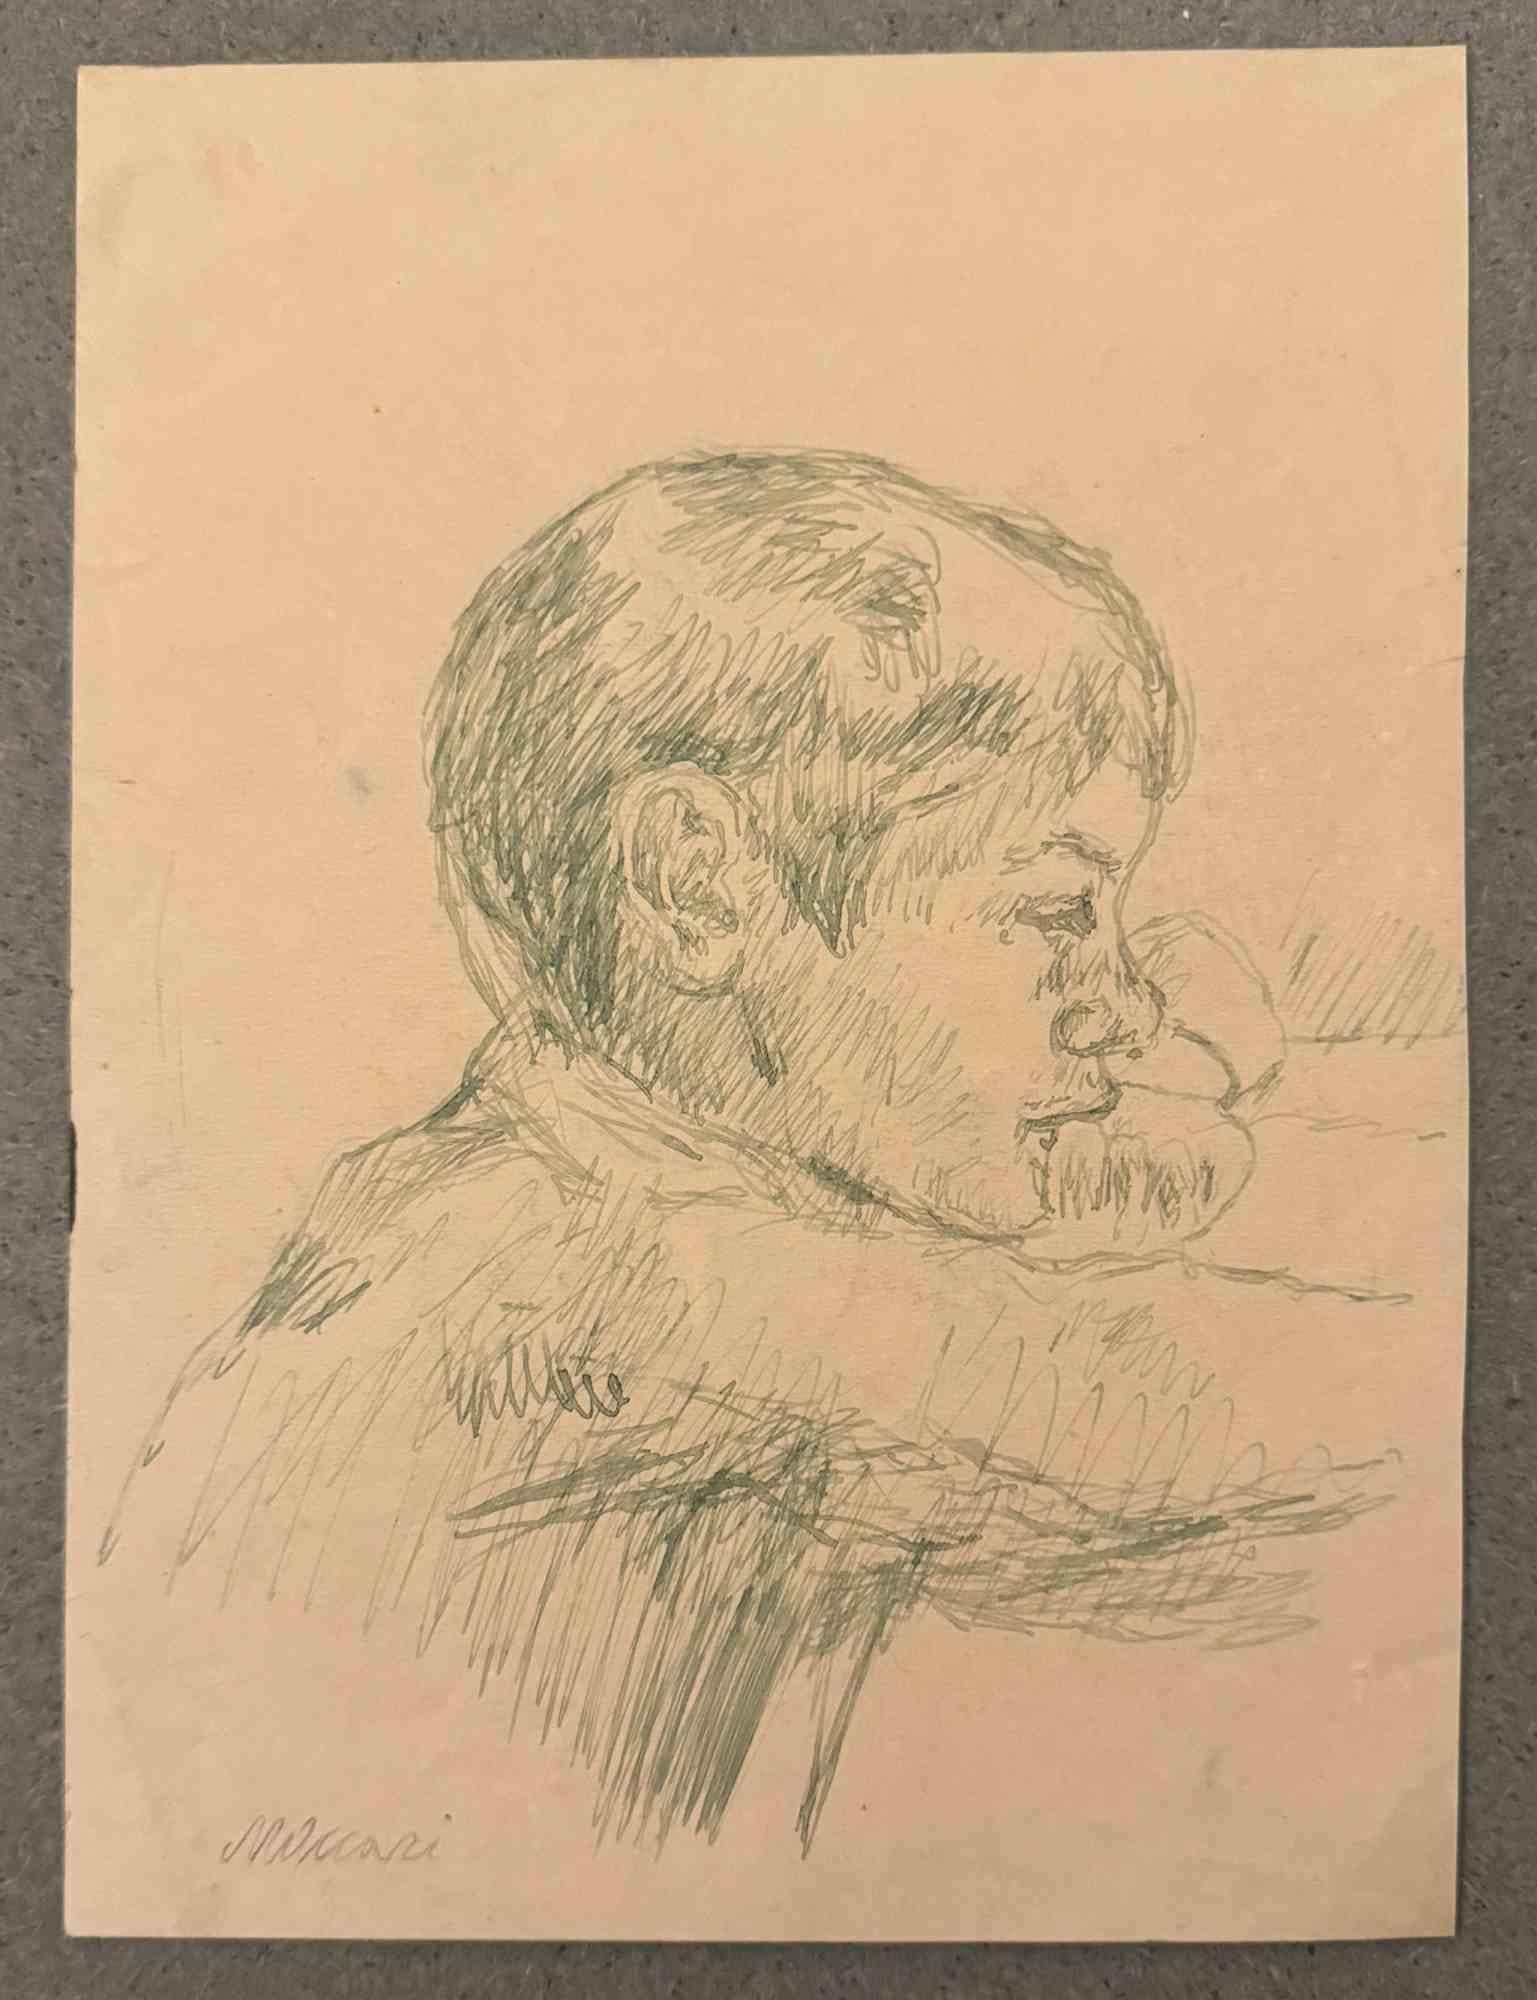 Portrait is a green pen drawing realized by Mino Maccari  (1924-1989) in the Mid-20th Century.

Hand-signed.

Good conditions with slight foxing.

Mino Maccari (Siena, 1924-Rome, June 16, 1989) was an Italian writer, painter, engraver and